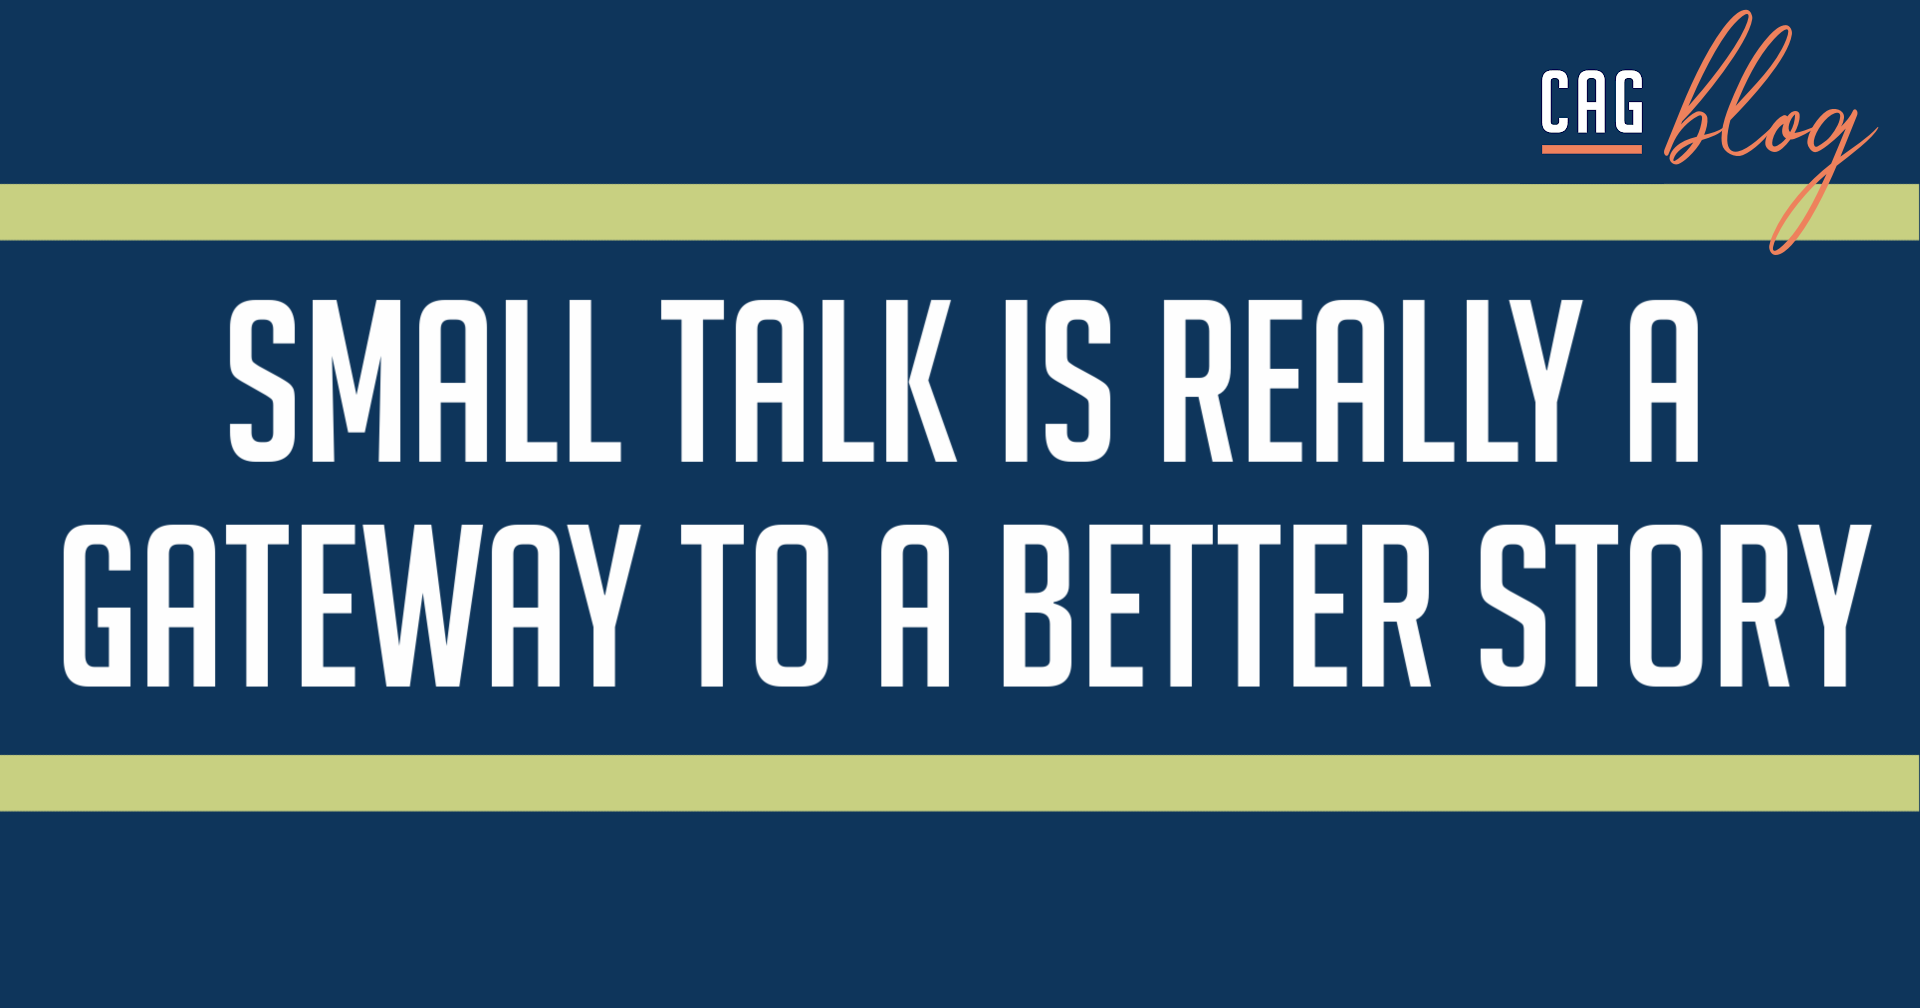 Small talk is really just a gateway to better storytelling